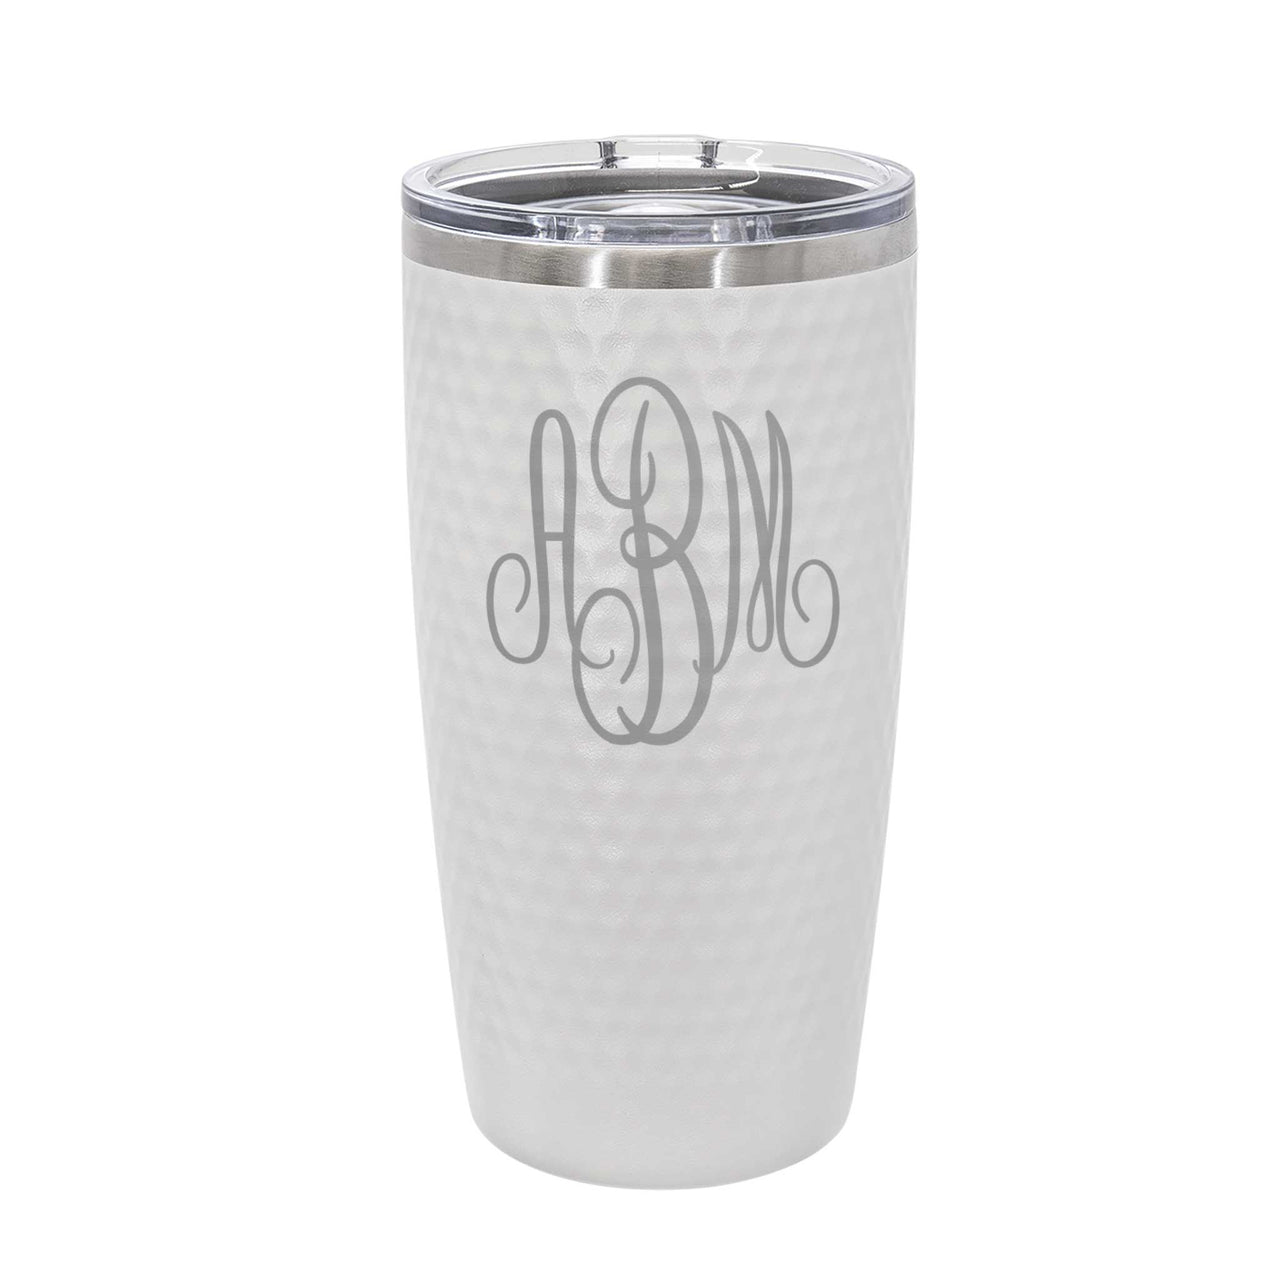 Personalized Golf Theme Steel Tumbler with Monogram - Mod Peach